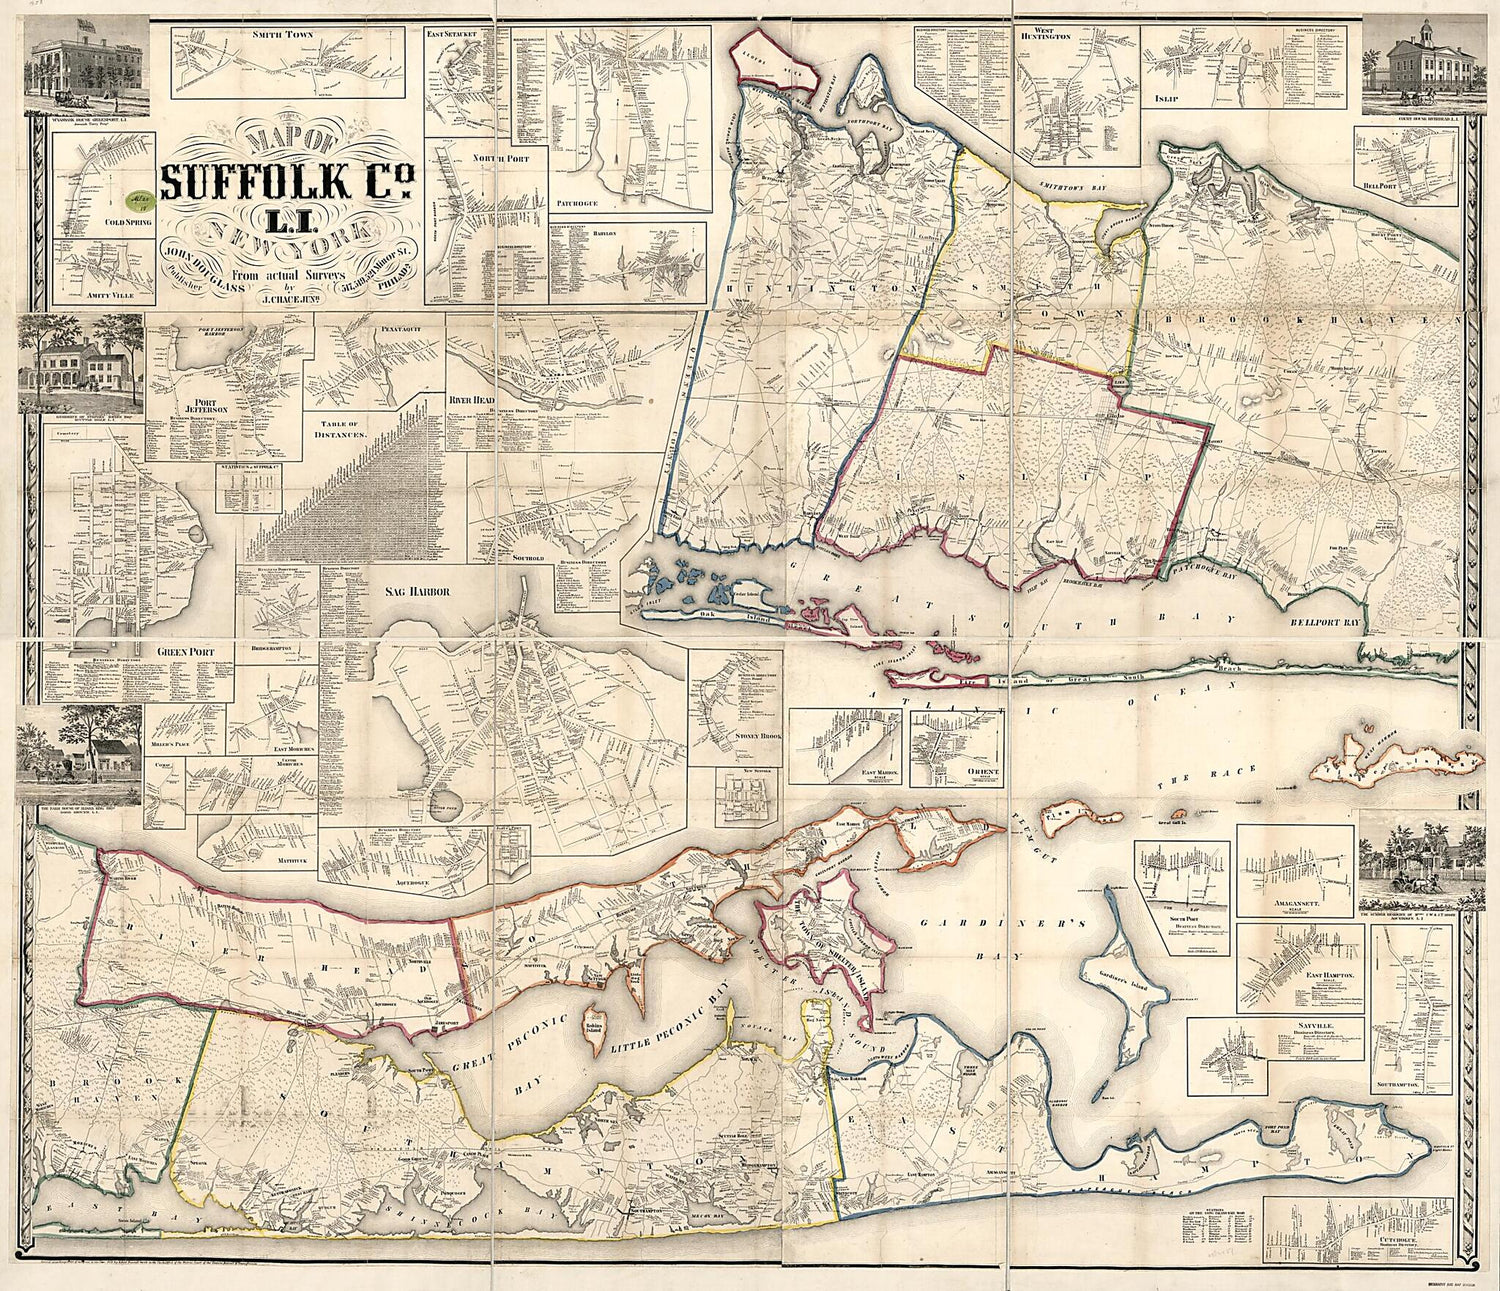 This old map of Map of Suffolk County, L.I., New York : from Actual Surveys from 1858 was created by J. Chace, John Douglass, Robert Pearsall Smith in 1858